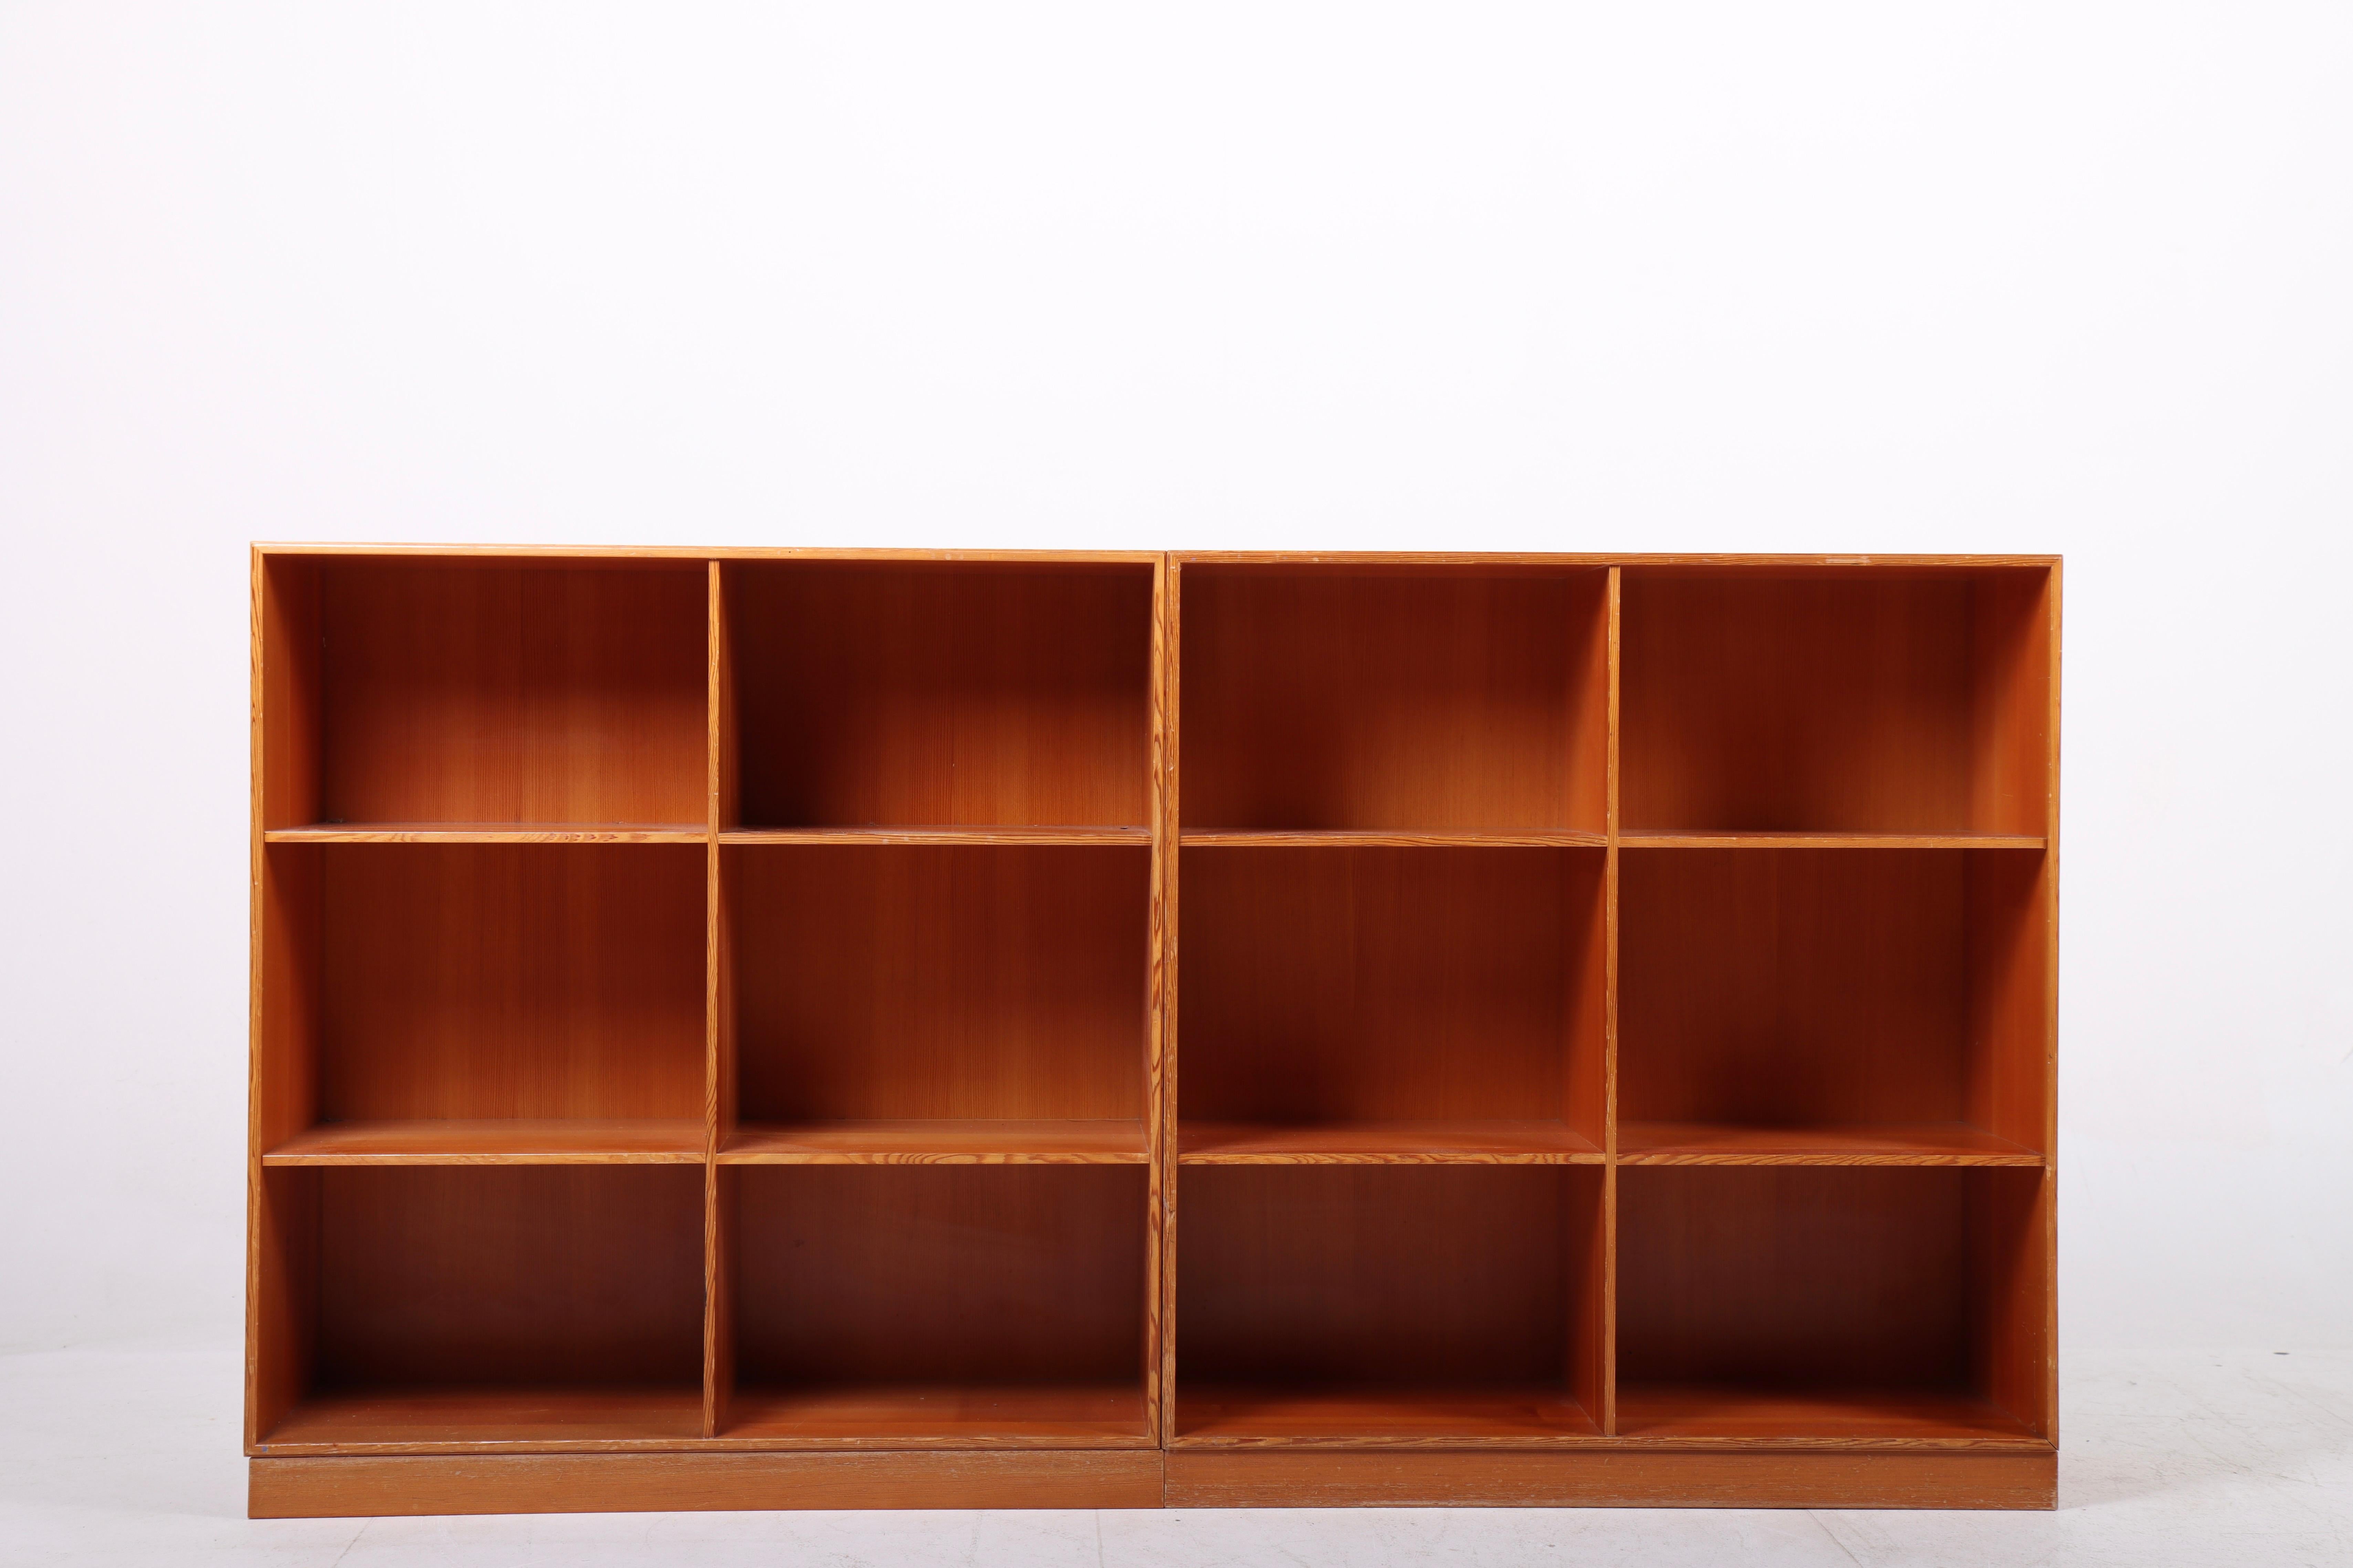 Pair of bookcase in solid Oregon pine. Designed by Mogens Koch for Rud. Rasmussen cabinetmakers in 1933. Made in Denmark. Great original condition.